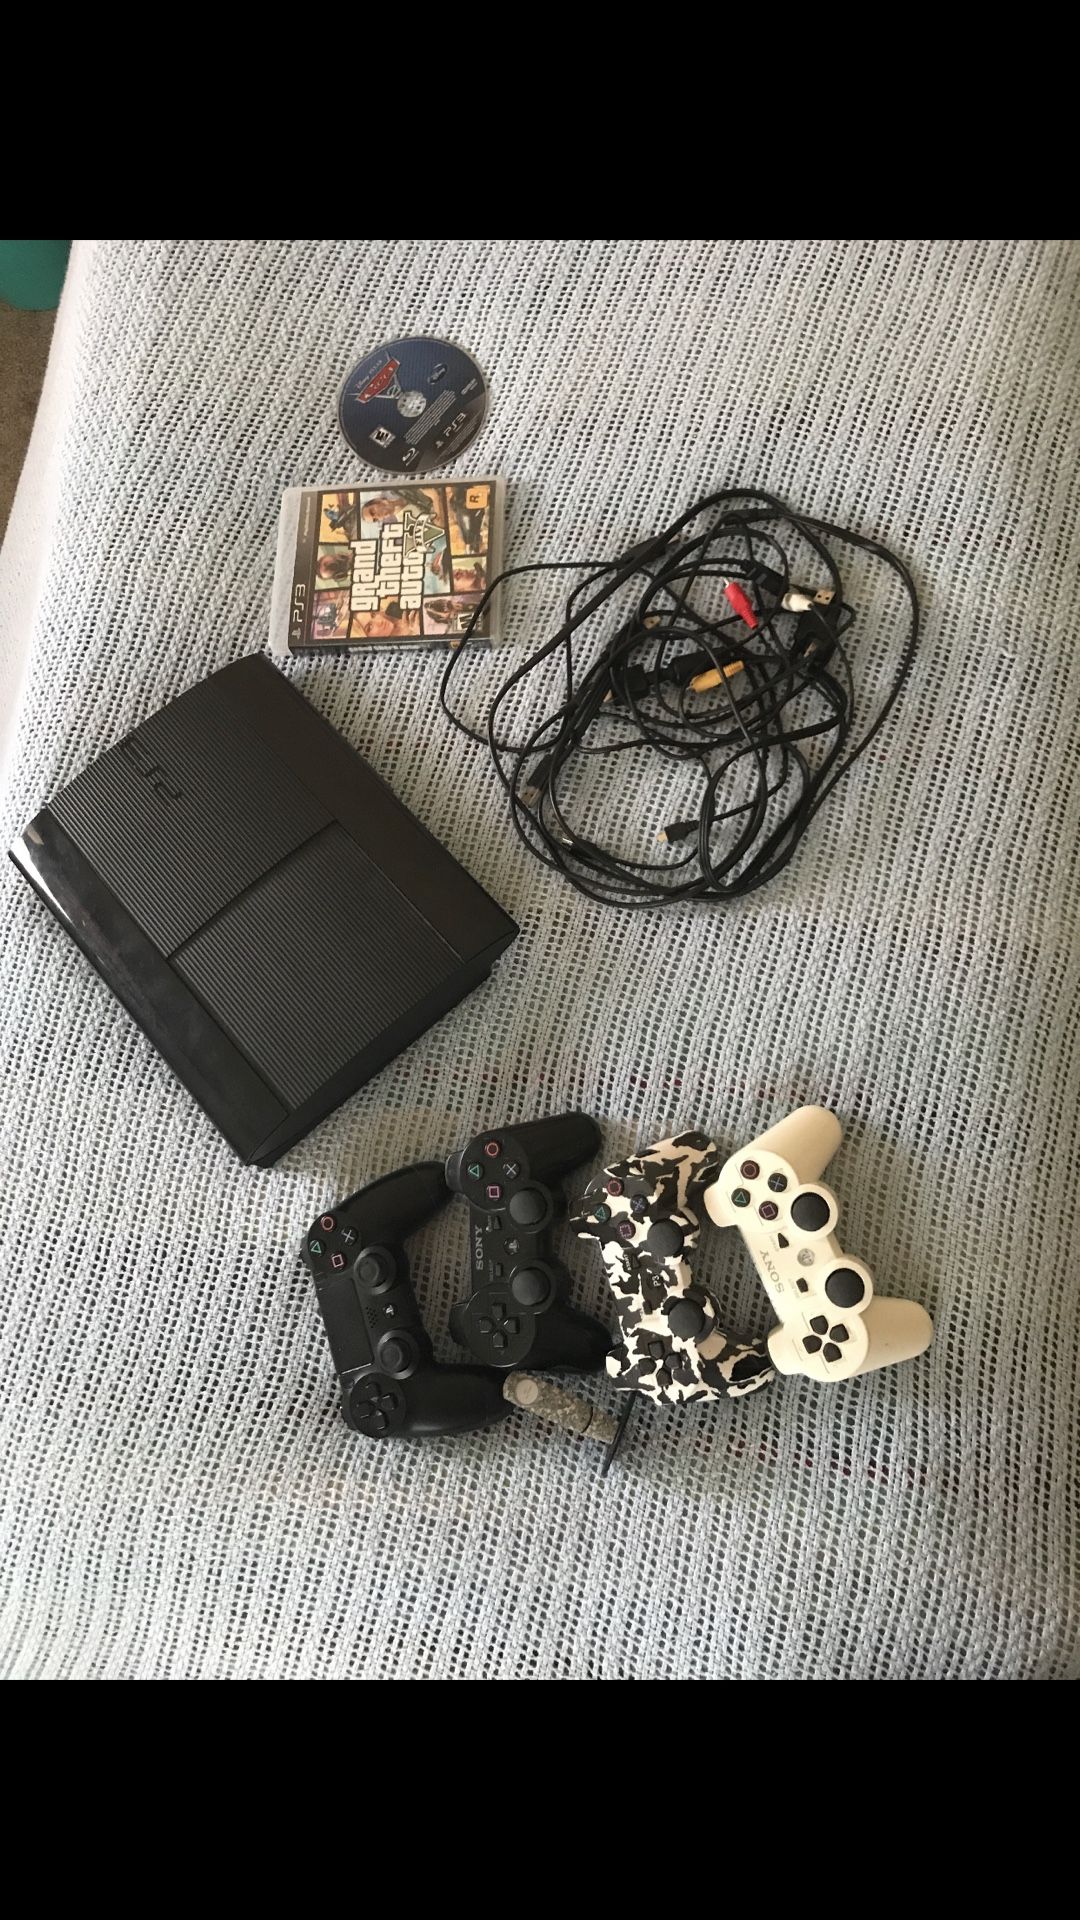 PS3 with 3 controllers and GTA , PS4 controller and PS4 game